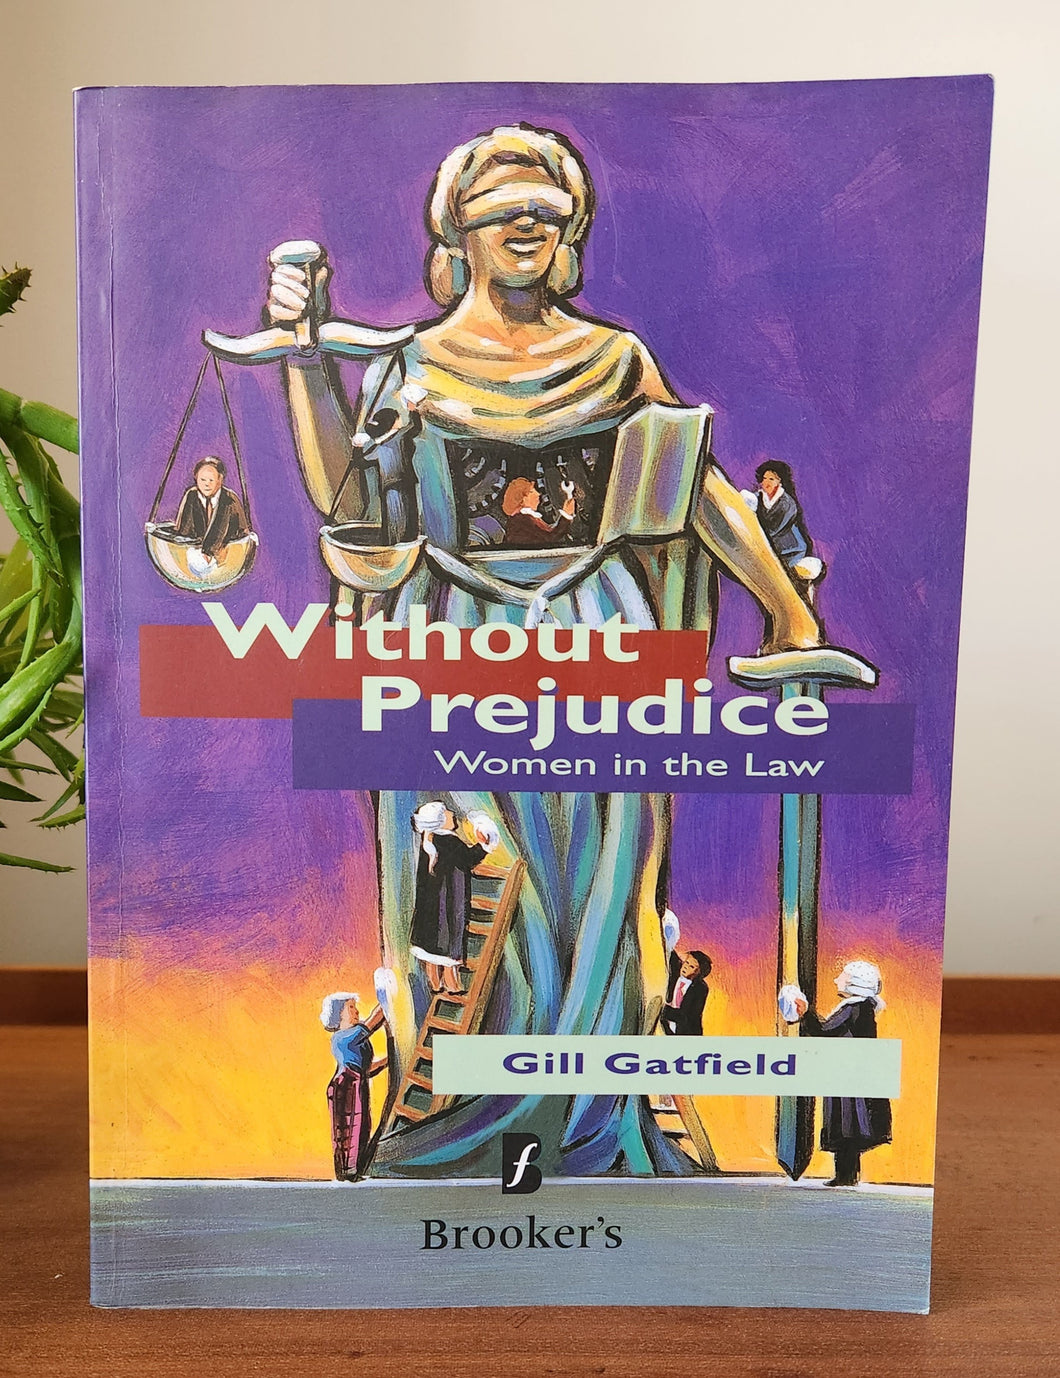 Without Prejudice: Women in the Law by Gill Gatfield